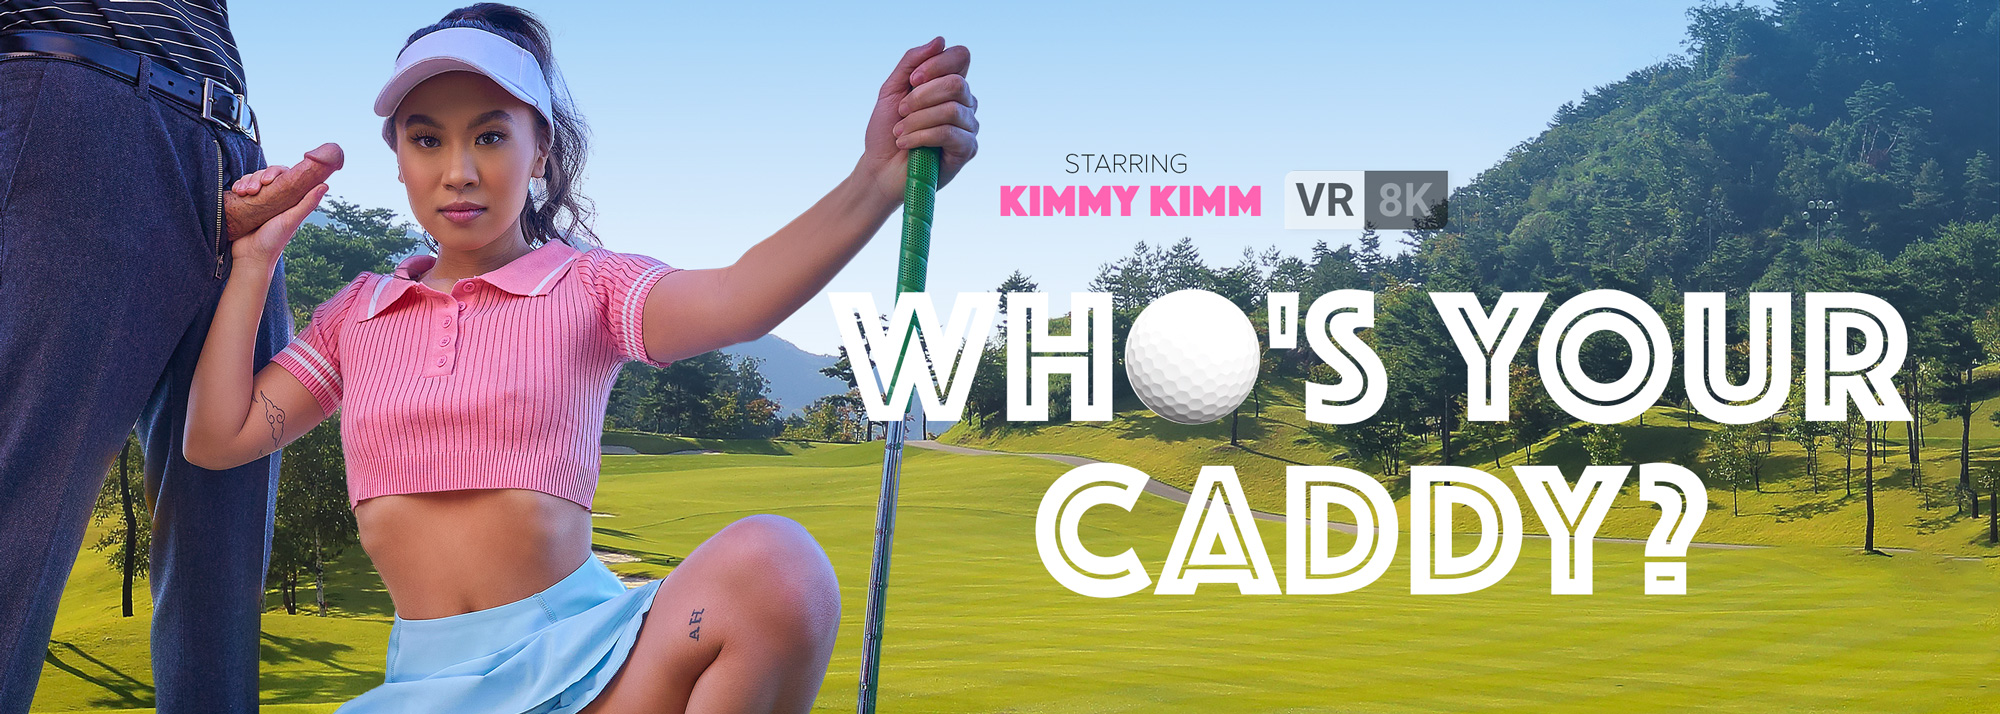 Who's Your Caddy? with Kimmy Kimm  Slideshow